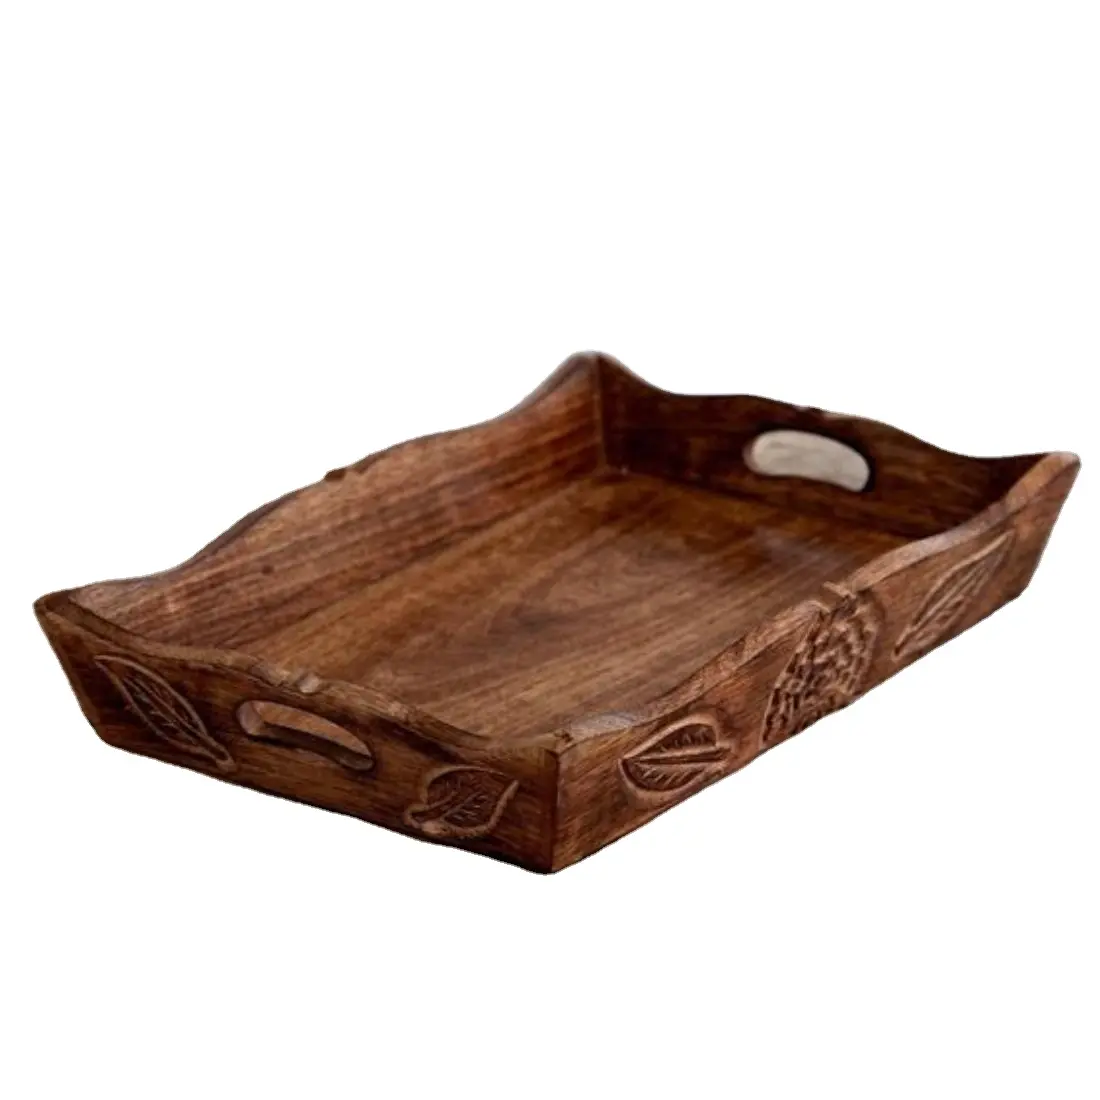 New Antique Wooden Crafts Vintage Tray For Breakfast Table Decorative Long Lasting Wooden Tray At Competitive Low Prices